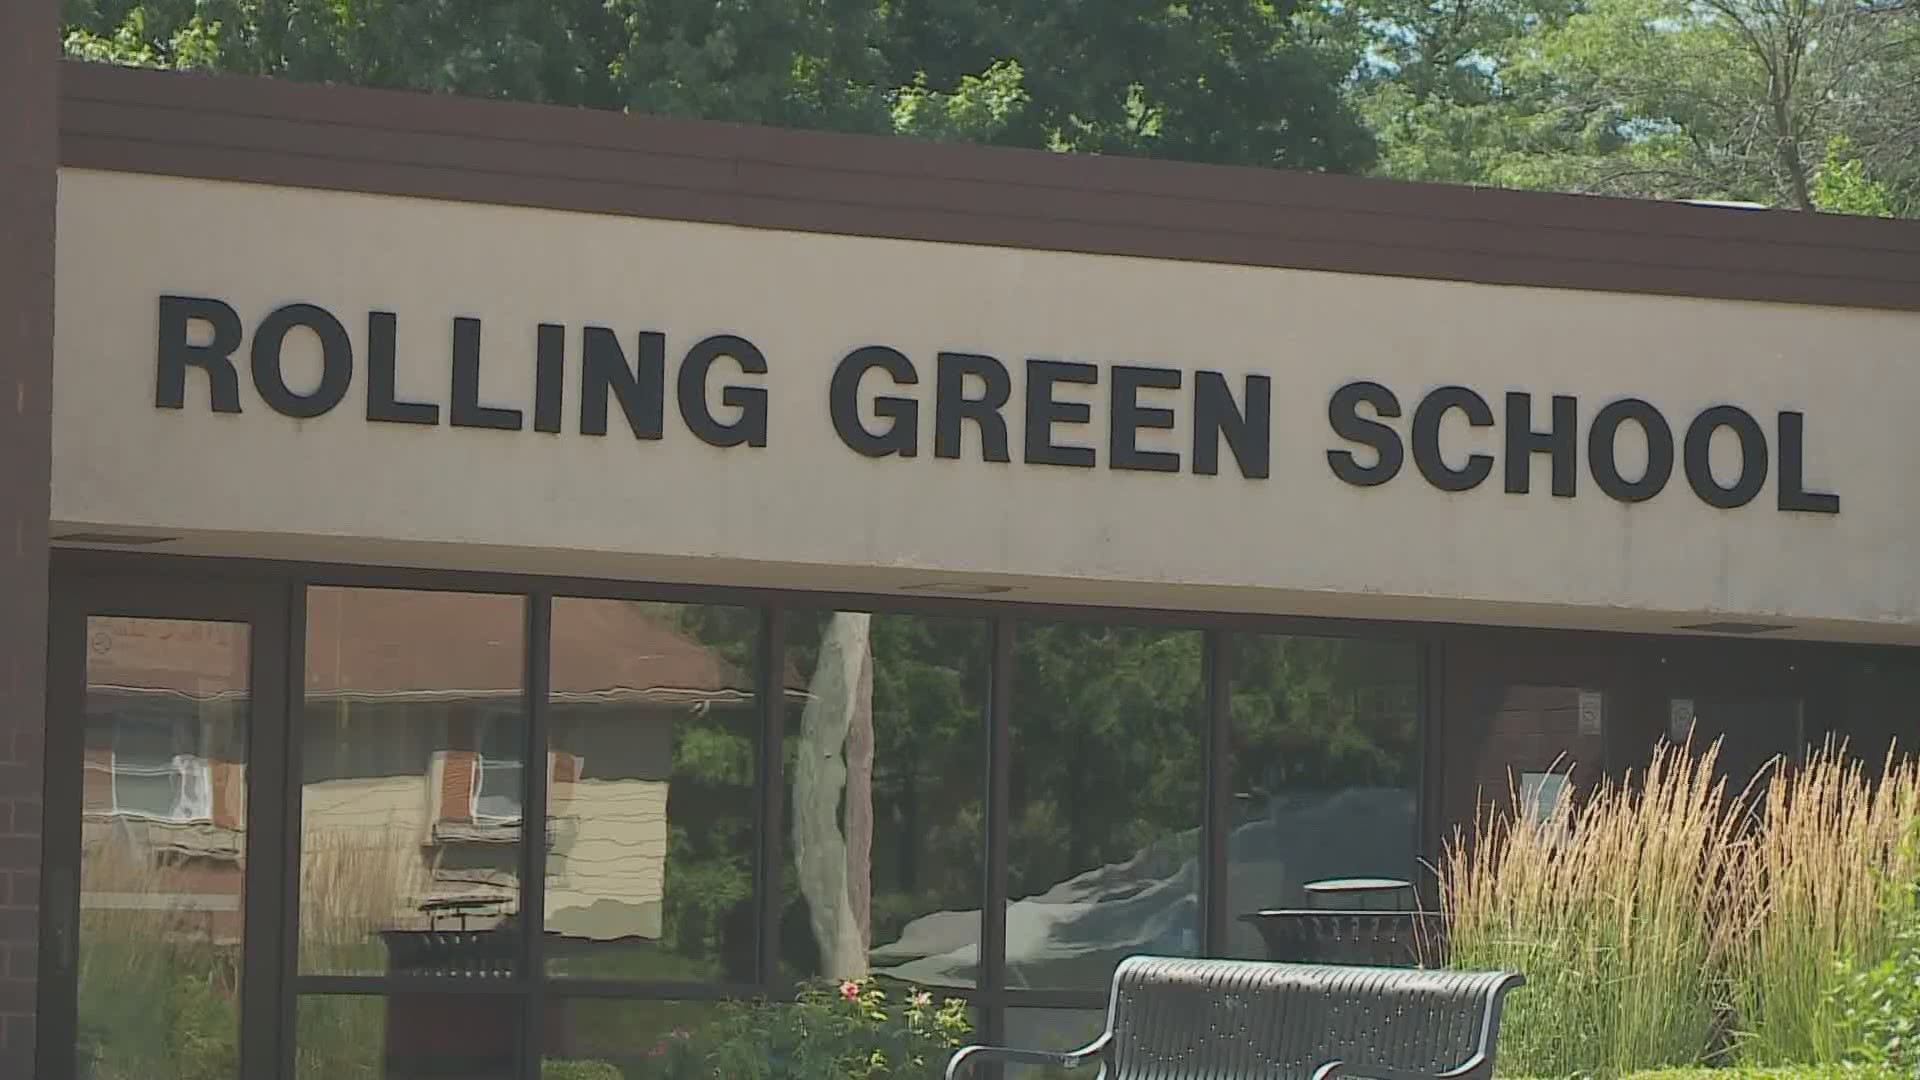 Rolling Green Elementary School is the first school in the state to begin classes for the fall 2020 semester.